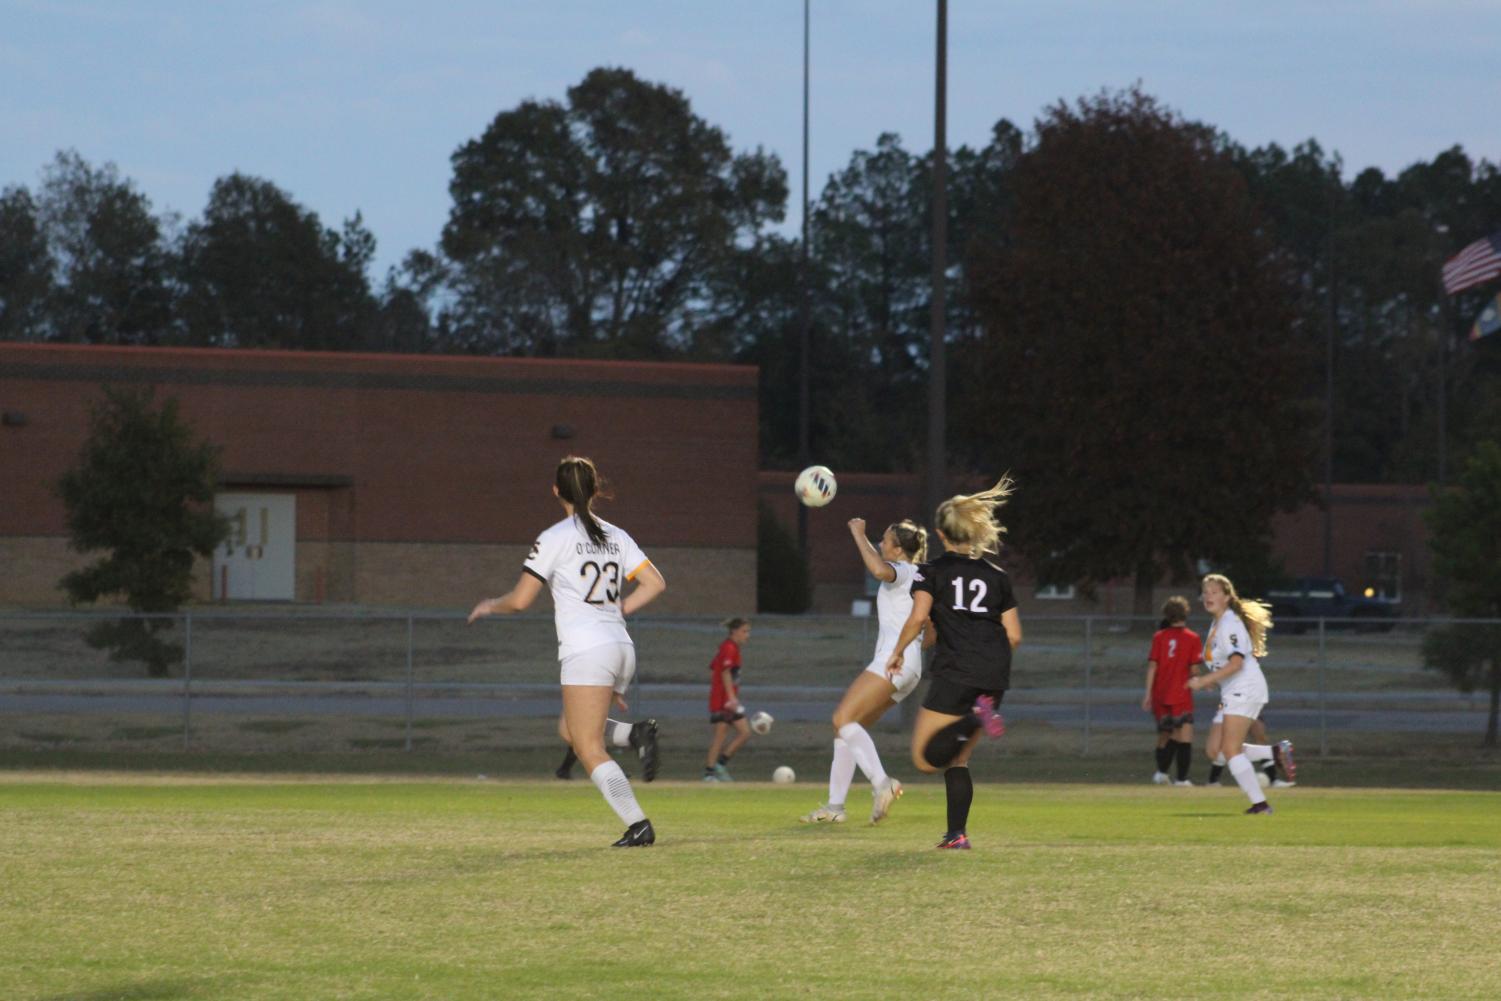 Lady+Mustangs+Soccer+drop+match+to+Southaven+1-3+%7C+Slideshow